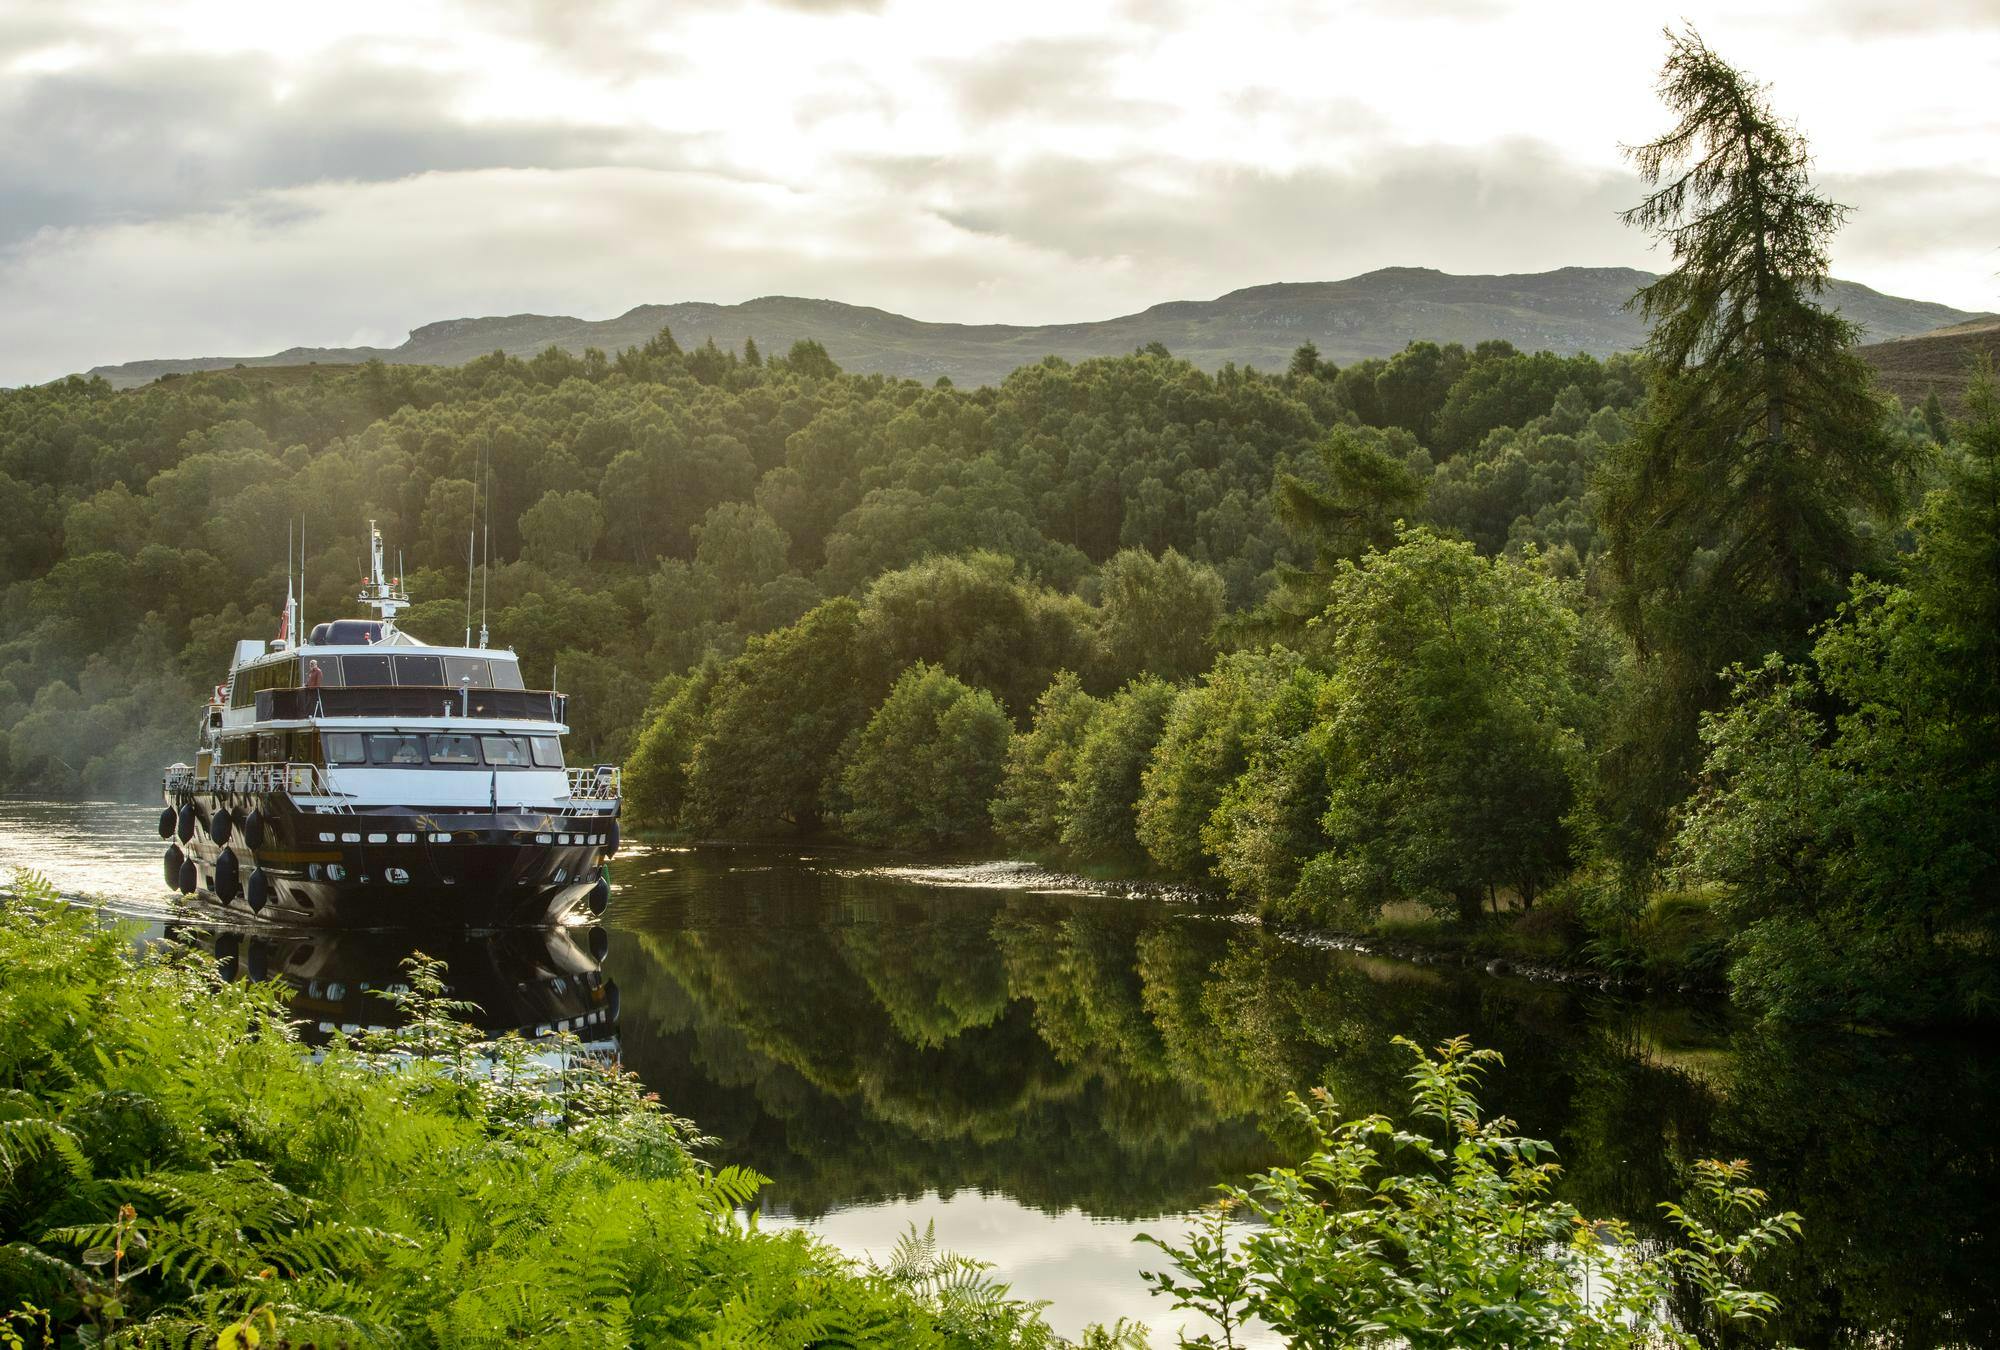 The ship Lord of the Glens cruising in Caledonian Canal, Scotland